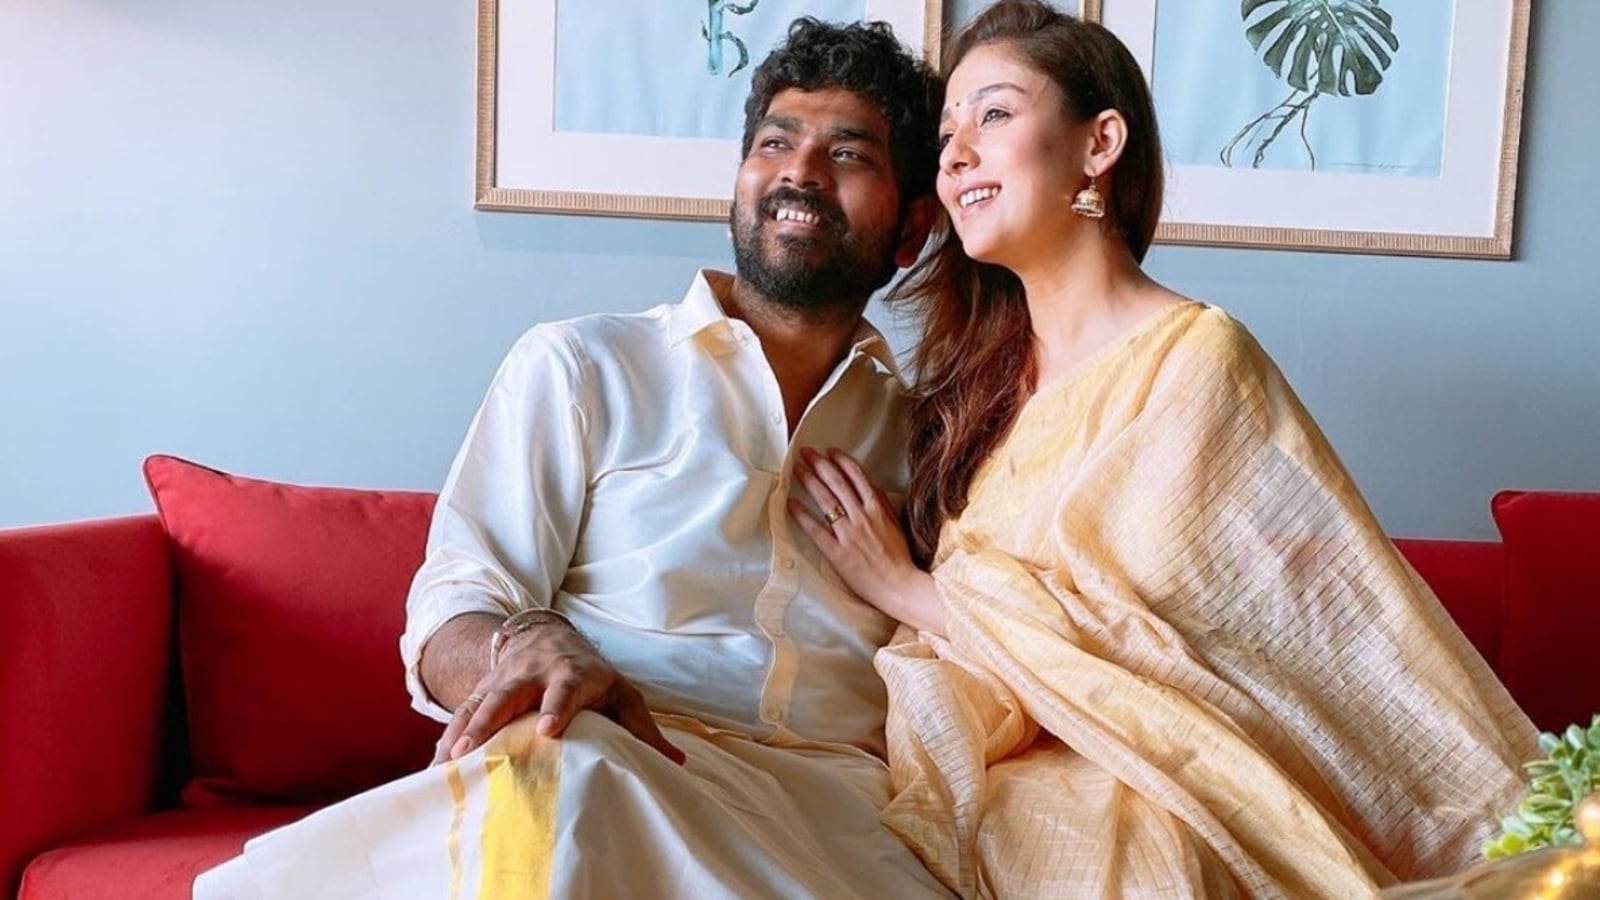 Nayanthara visits Vignesh Shivn’s ancestral temple amid marriage rumours, see video